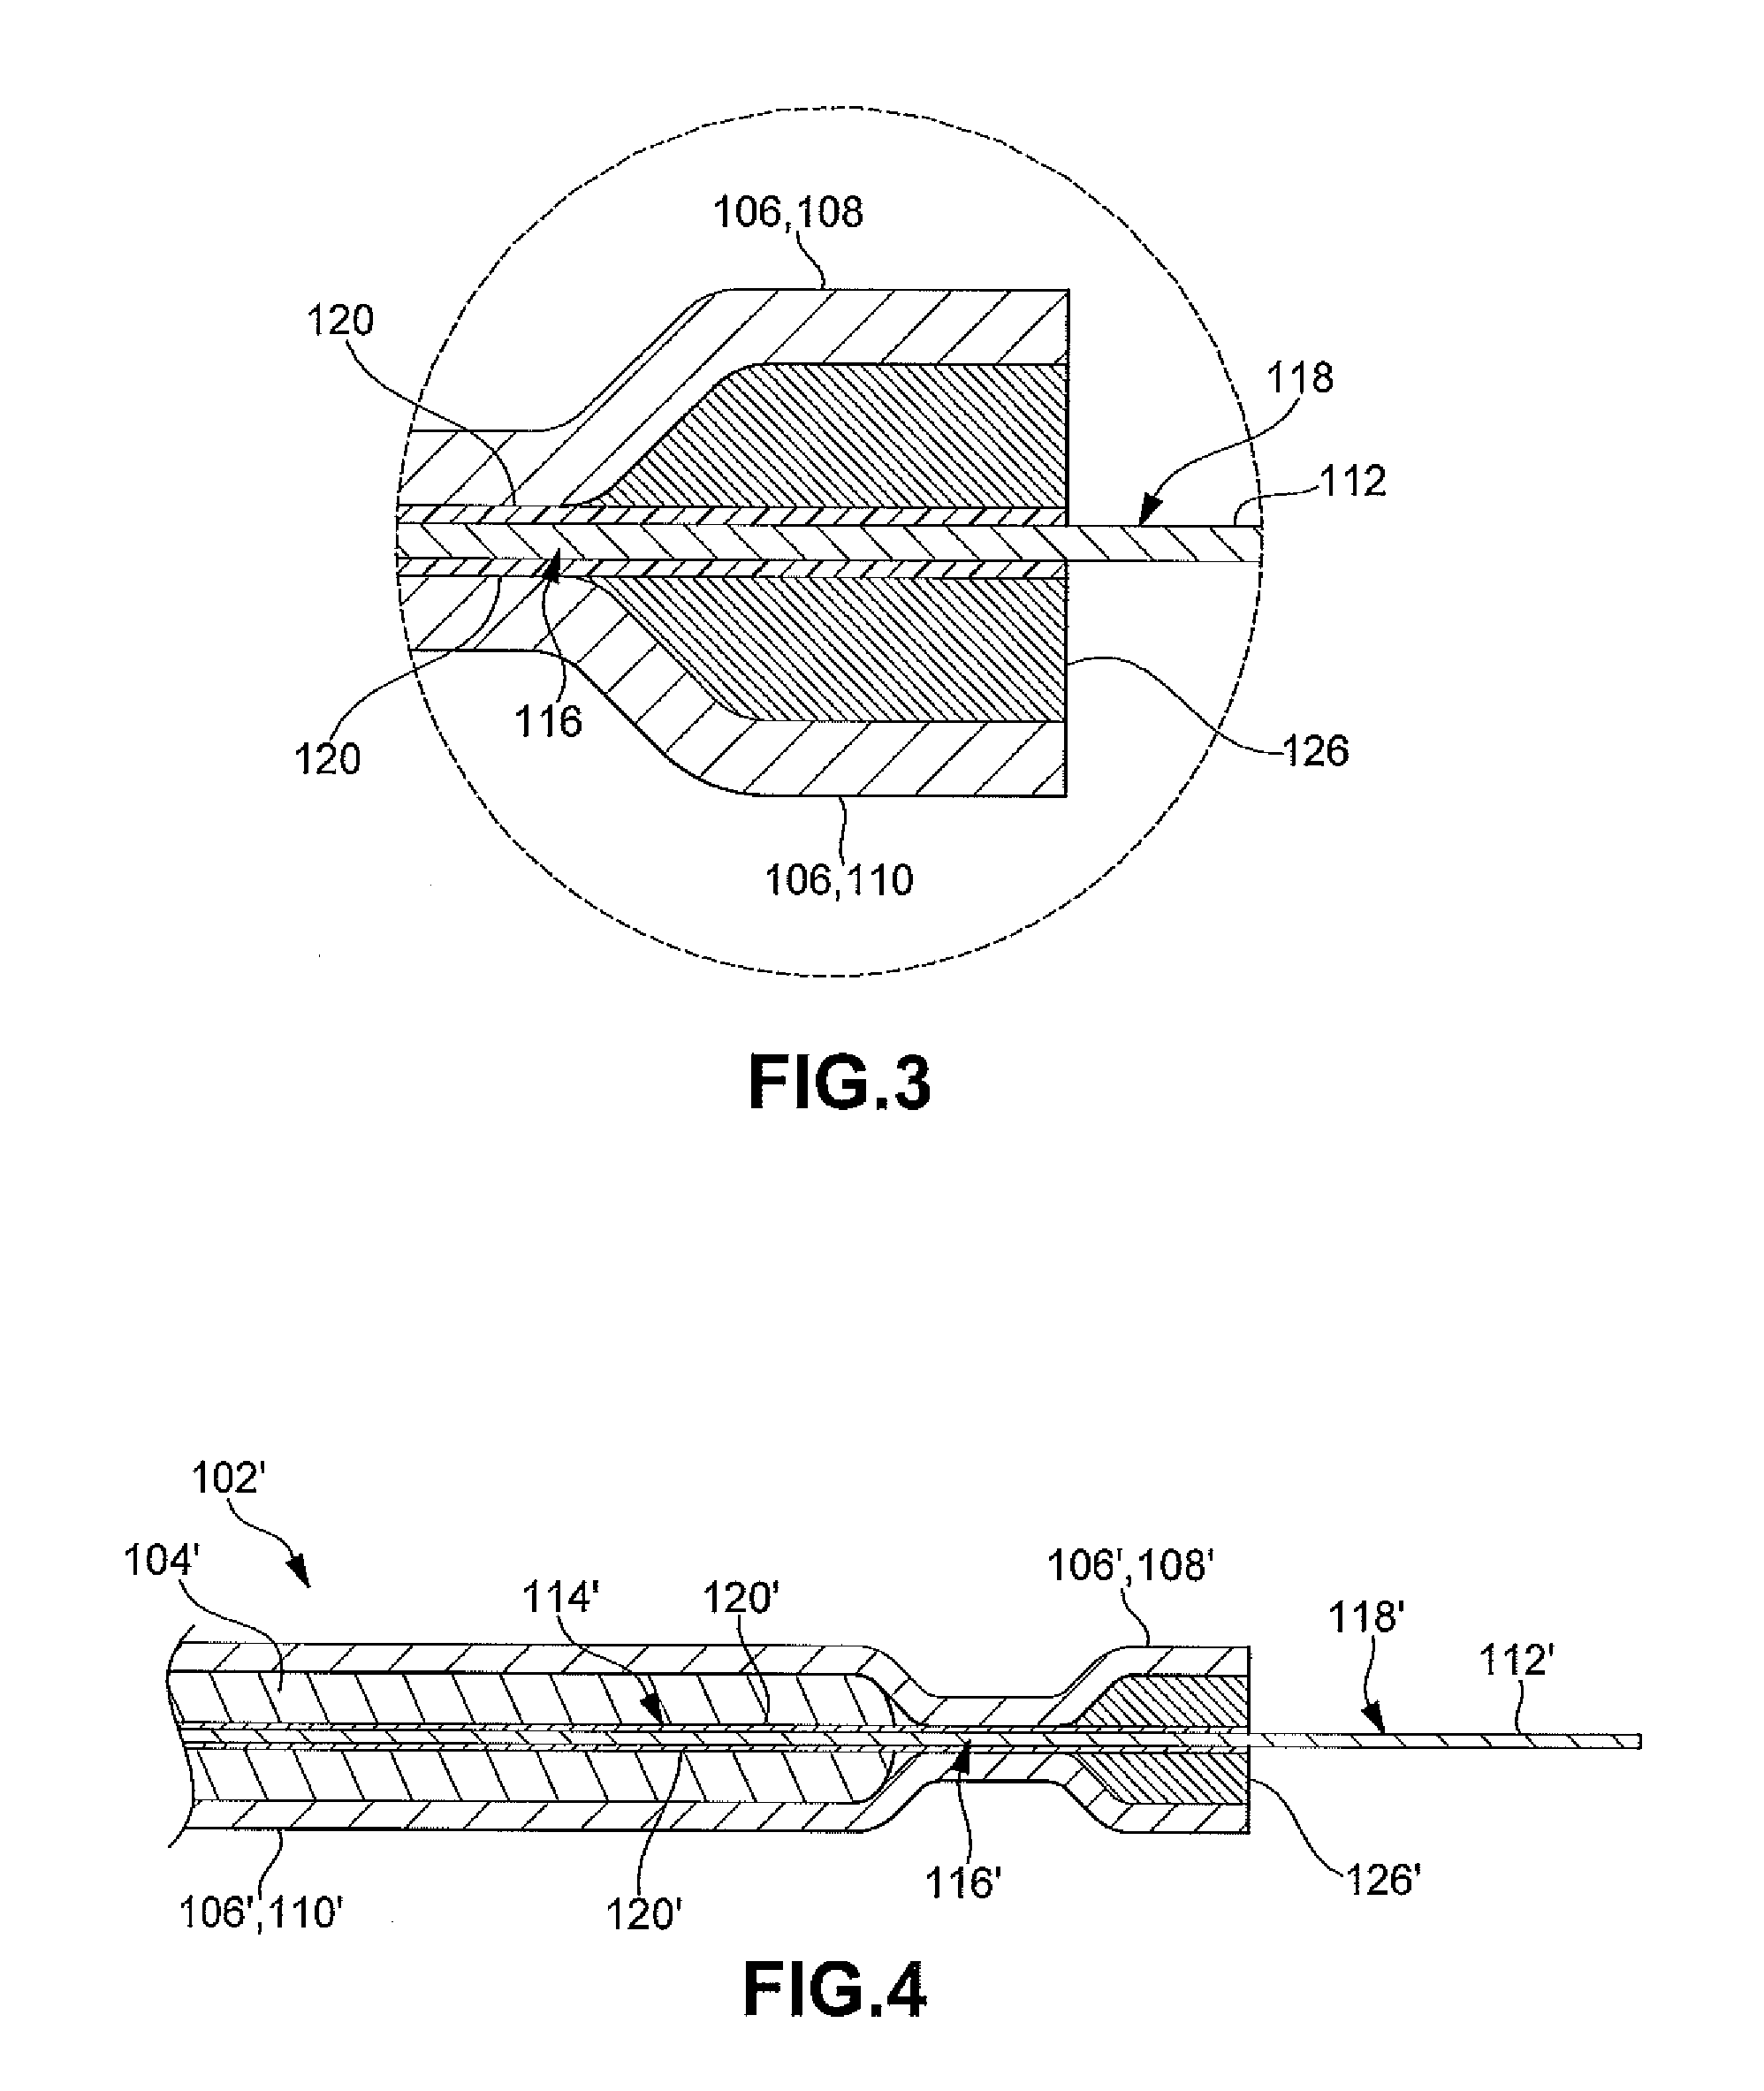 Prismatic cell with integrated cooling plate